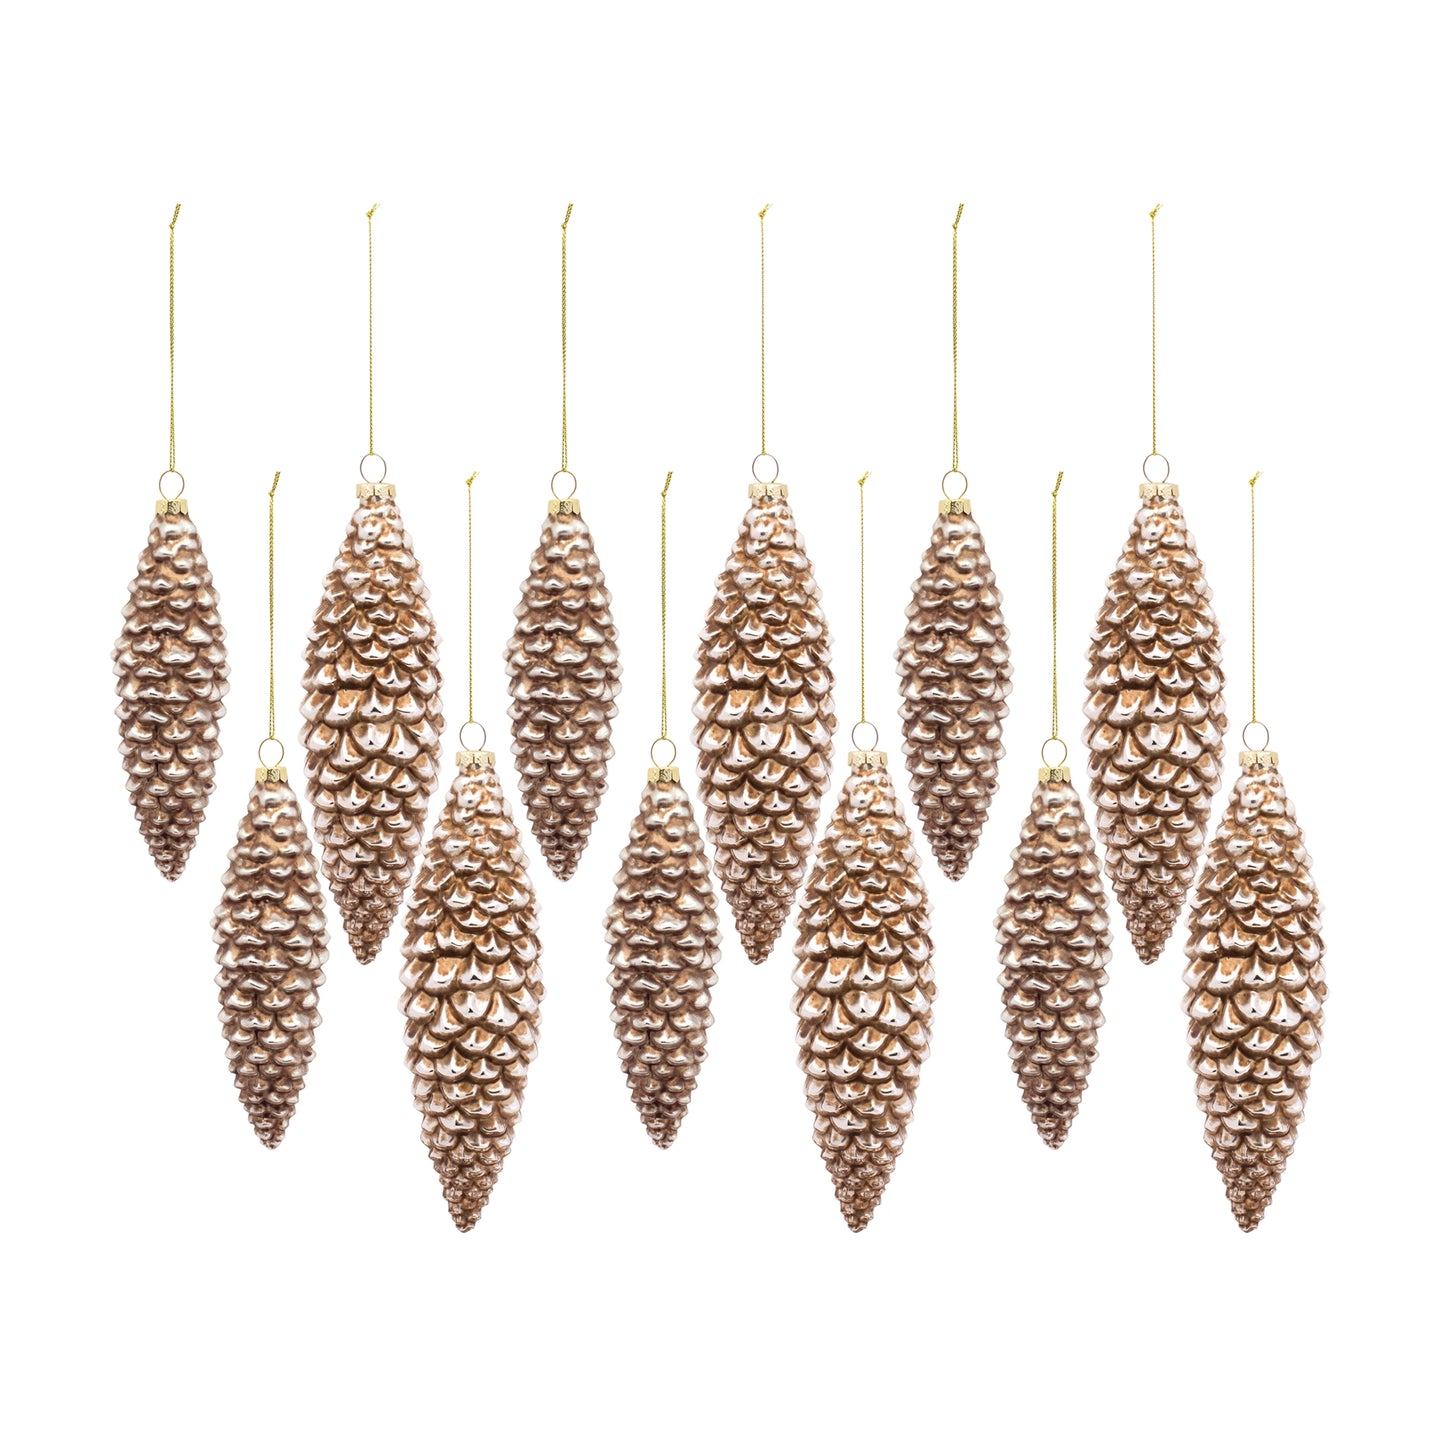 Bronze Frosted Pinecone Drop Ornament (Set of 12)